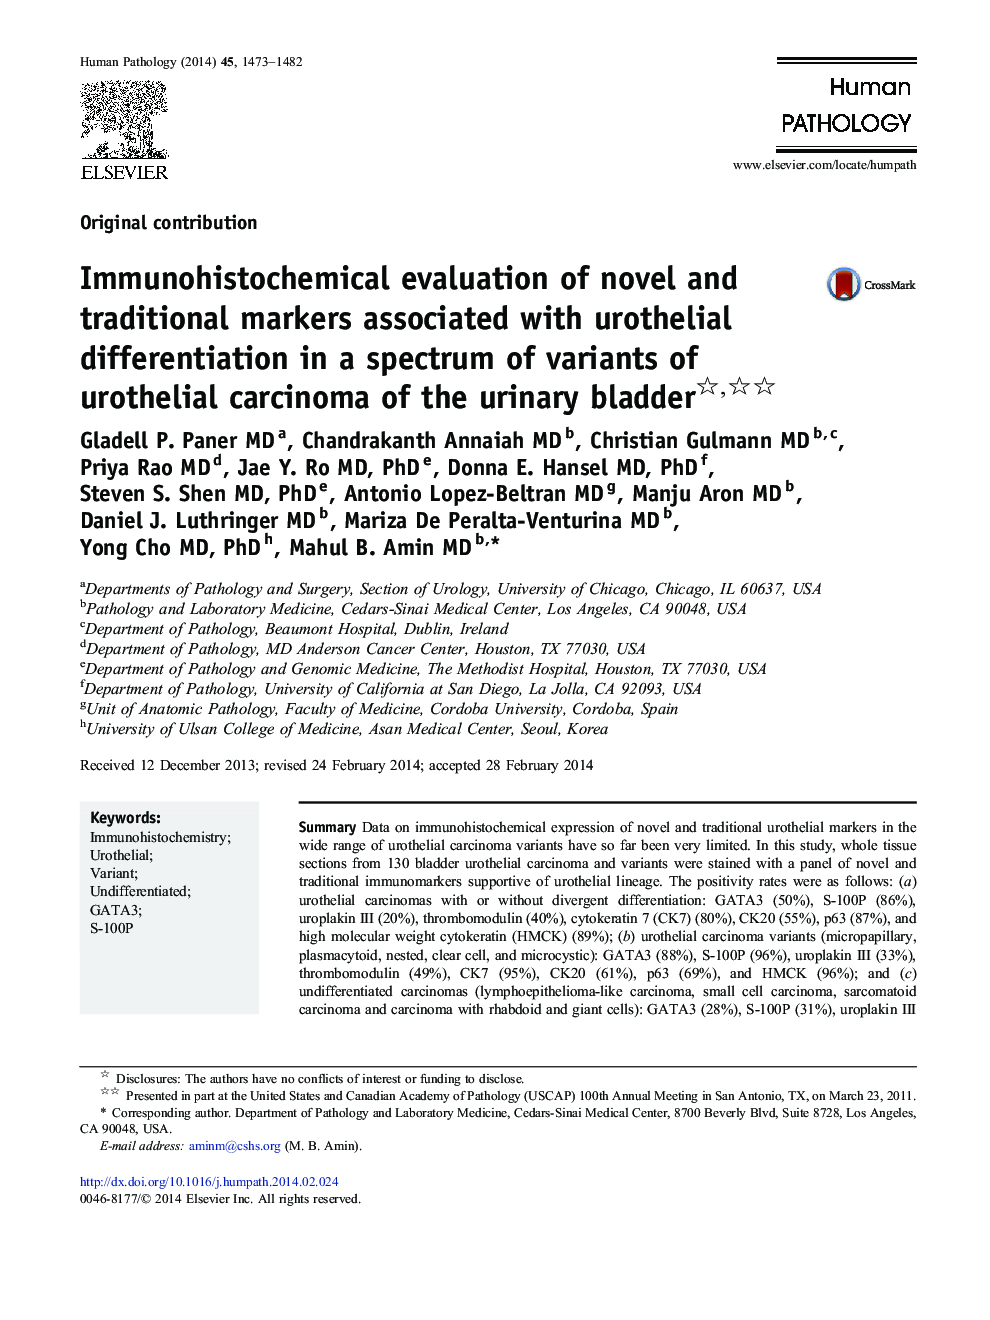 Immunohistochemical evaluation of novel and traditional markers associated with urothelial differentiation in a spectrum of variants of urothelial carcinoma of the urinary bladder 